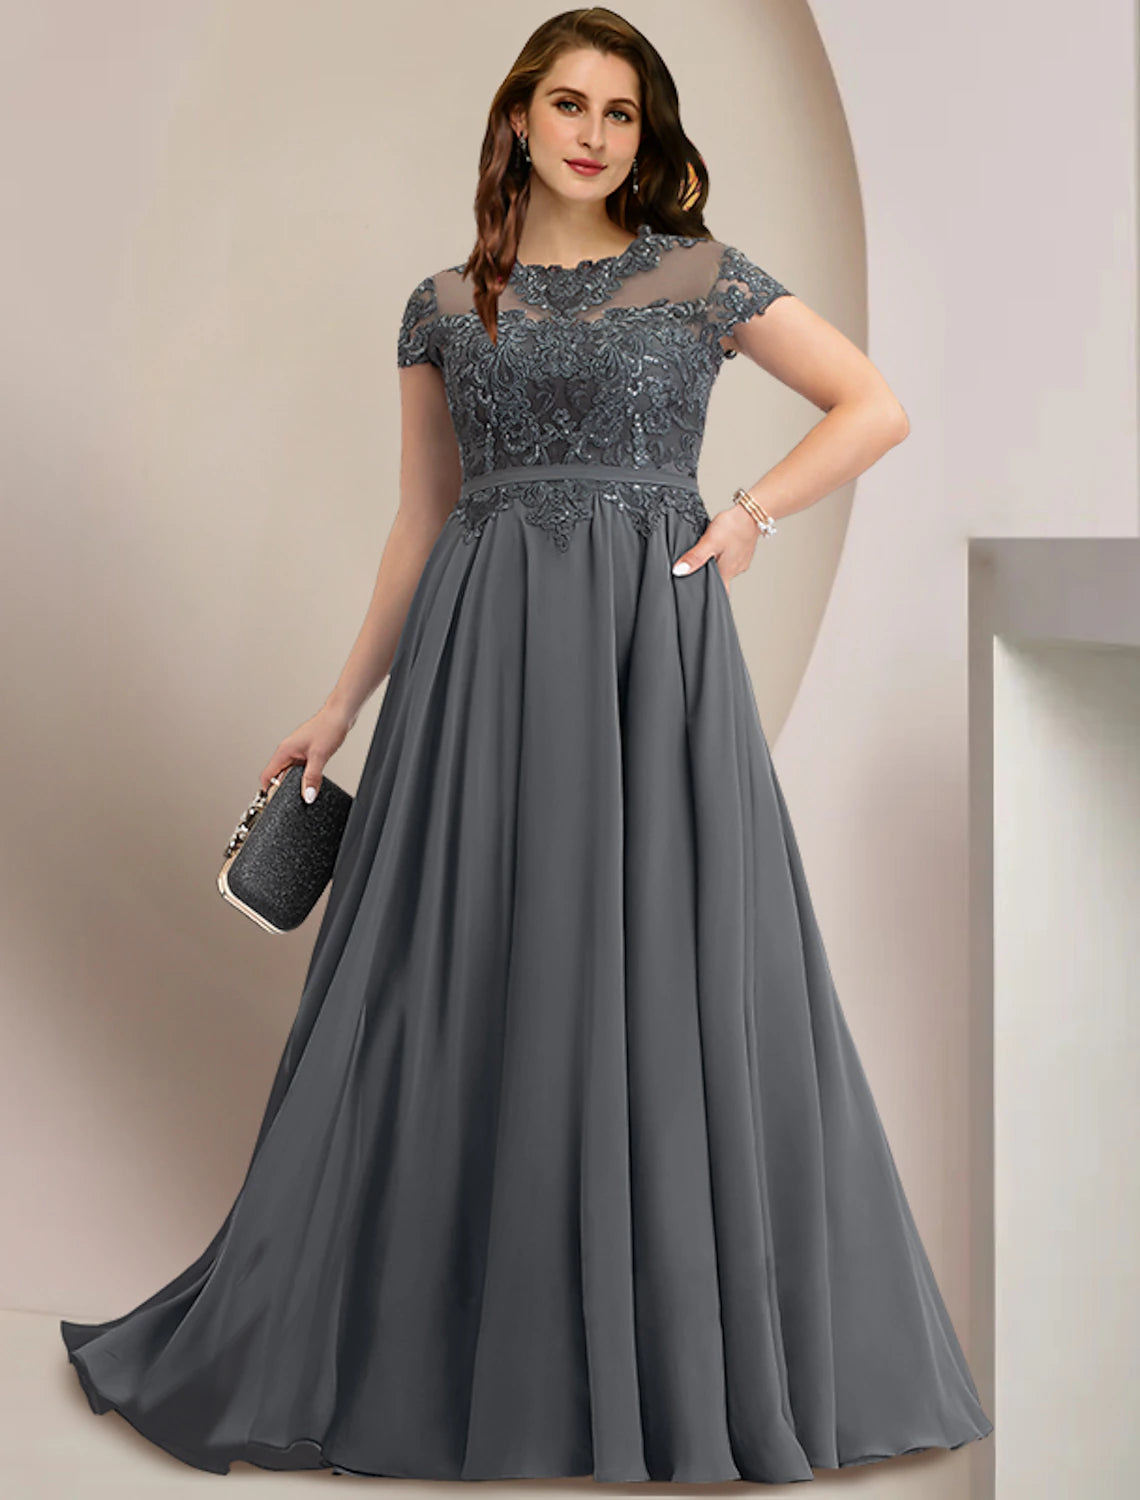 Plus Size Curve Mother of the Bride Dress Wedding Guest Elegant Party Jewel Neck Floor Length Chiffon Lace Short Sleeve with Pleats Sequin